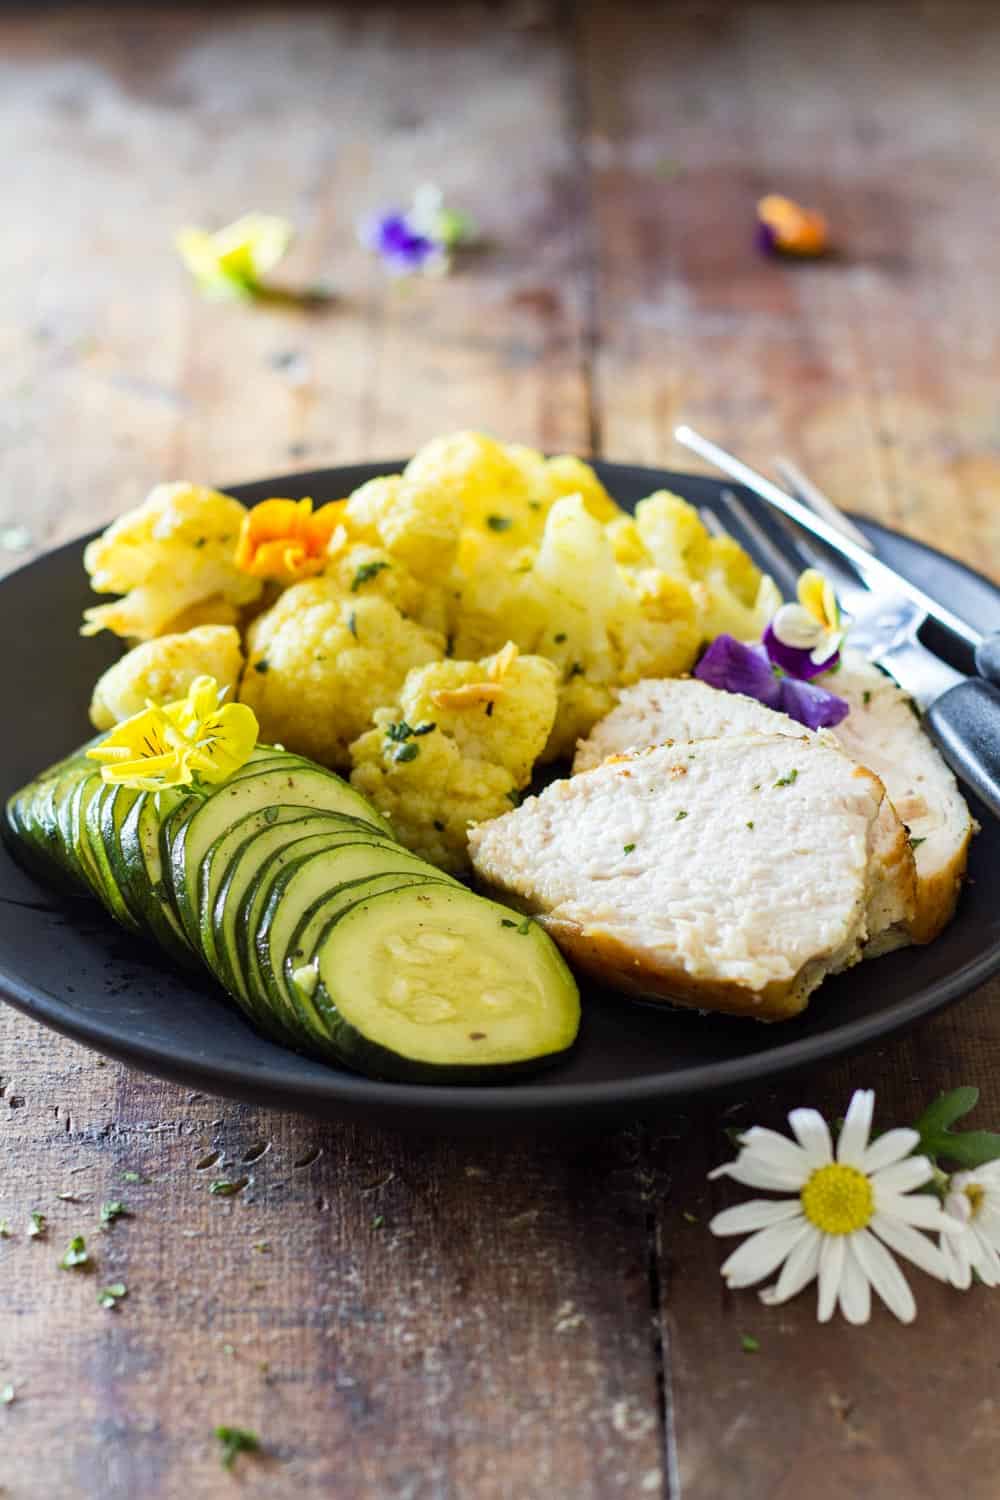 Sliced Curried Chicken with cauliflower and sliced zucchini in a black plate.